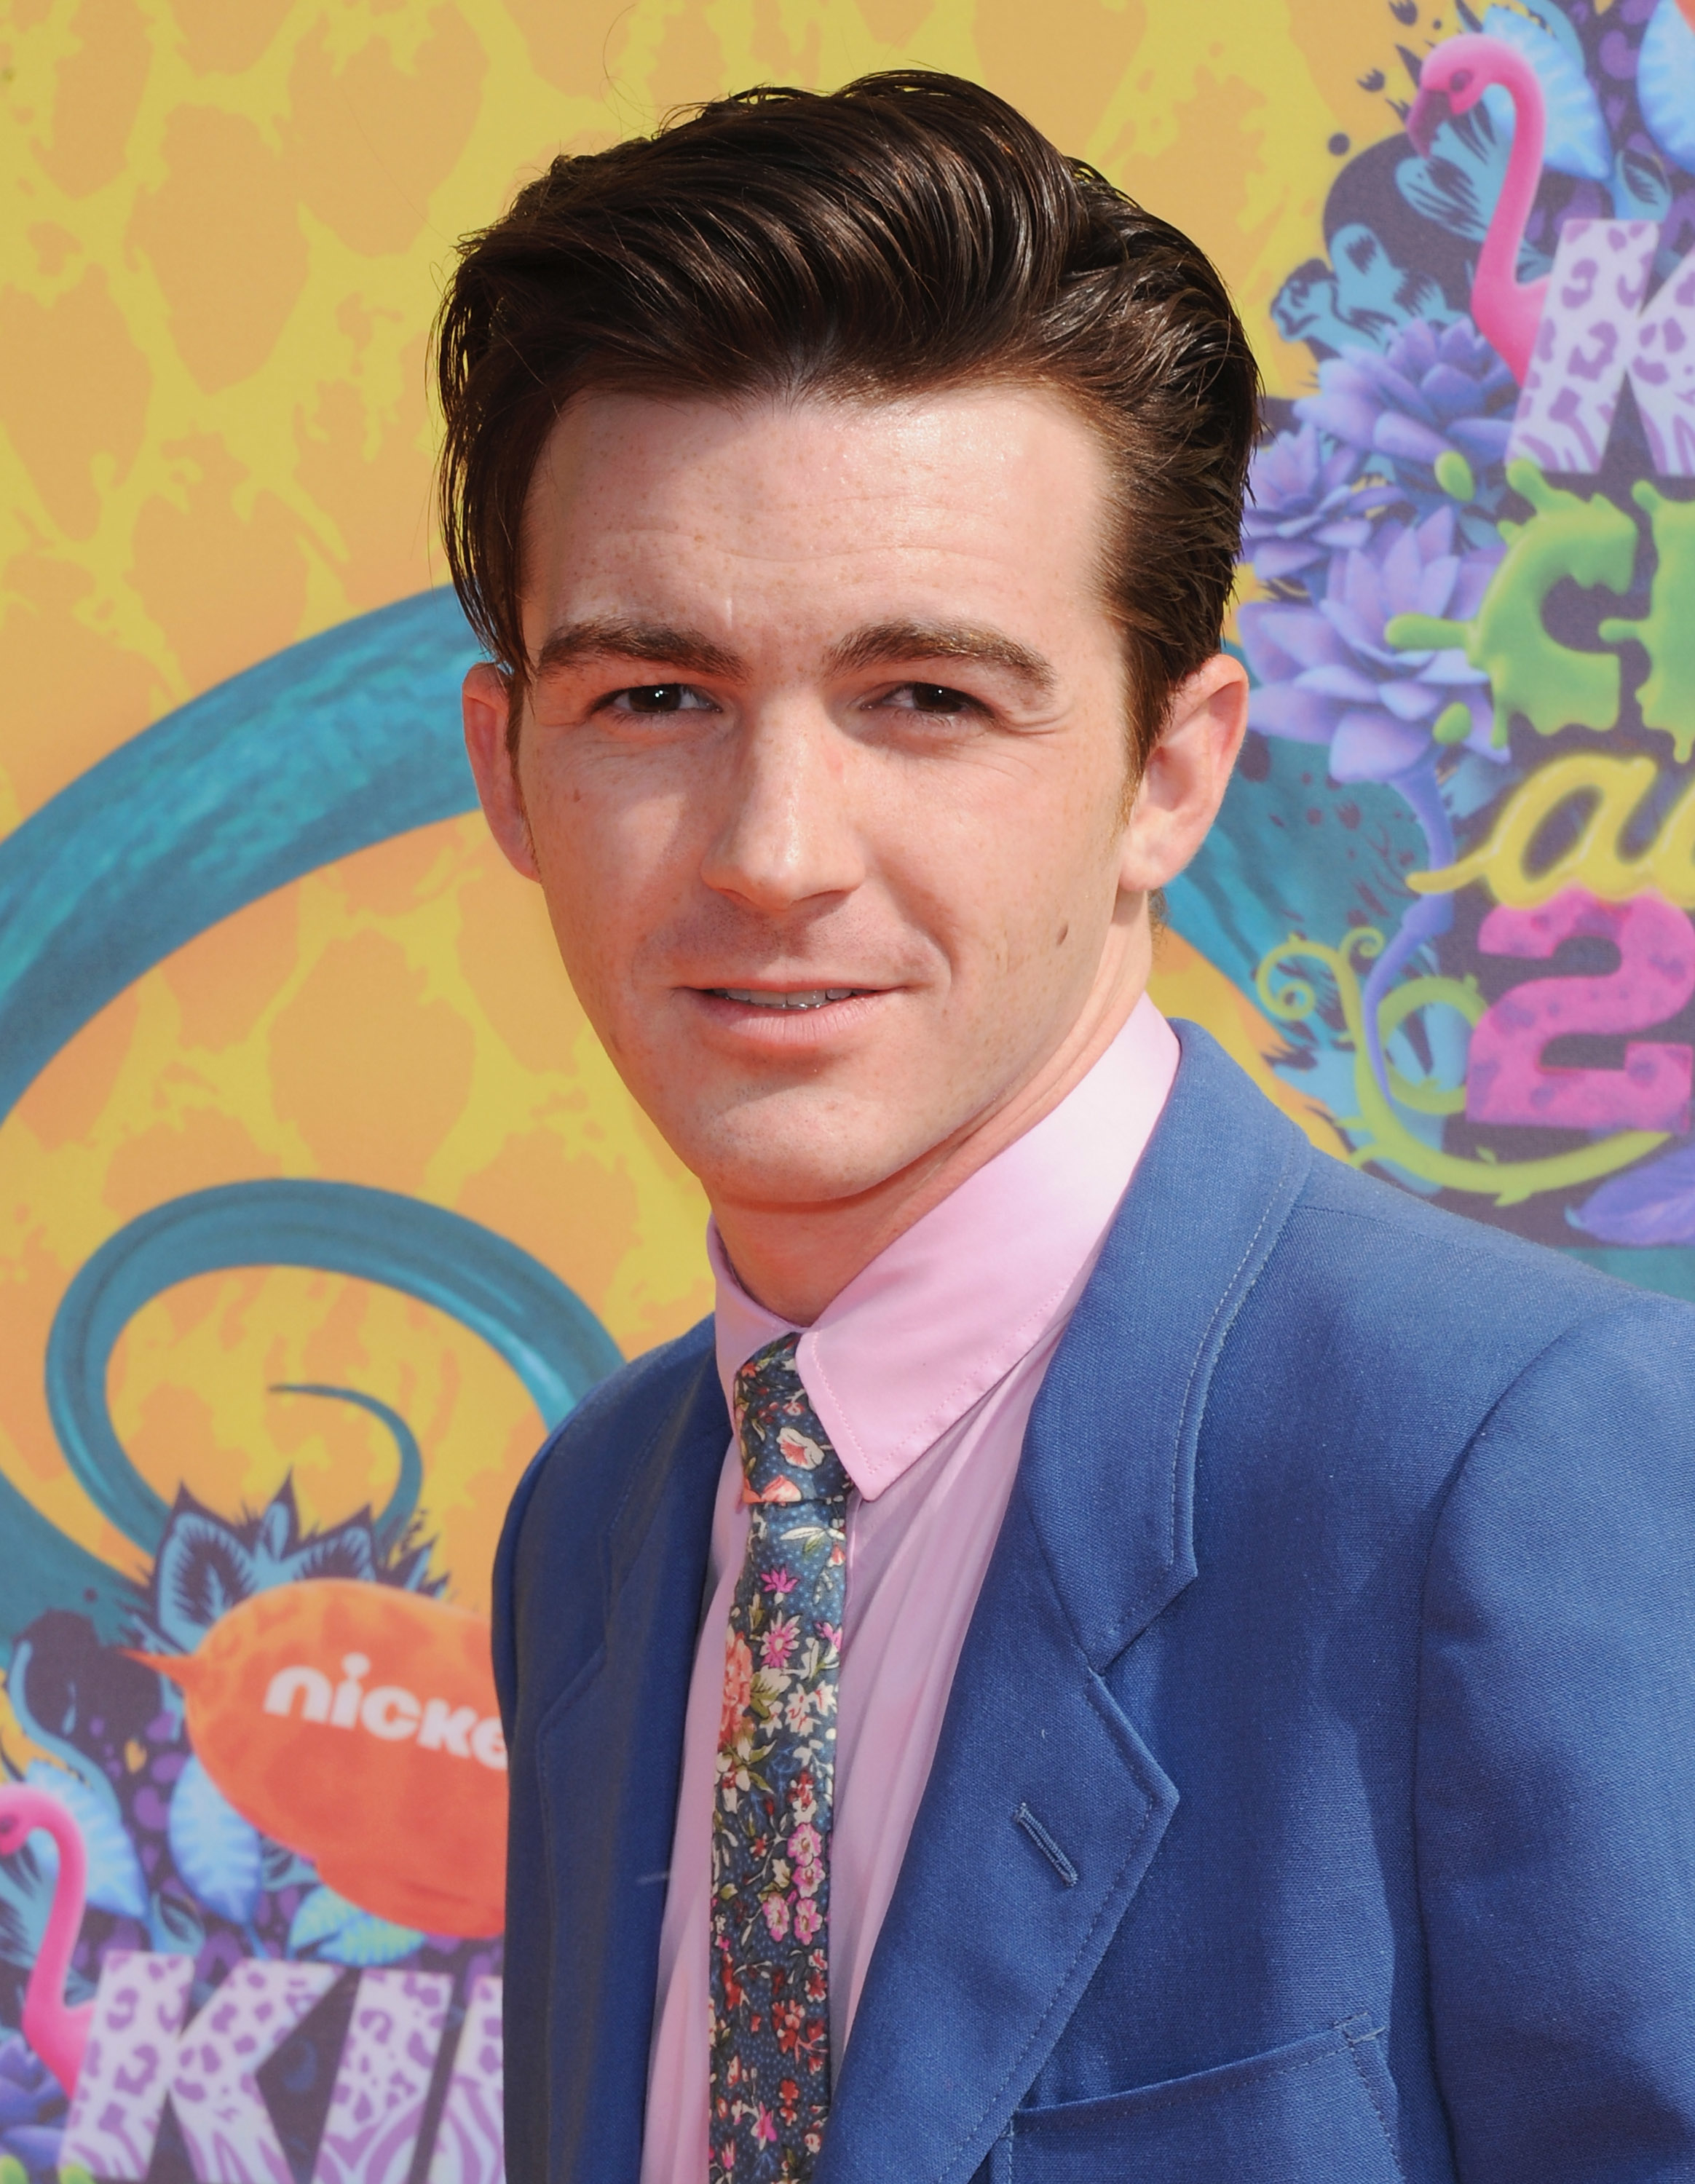 Drake Bell in a blue suit with a floral shirt at the Nickelodeon event